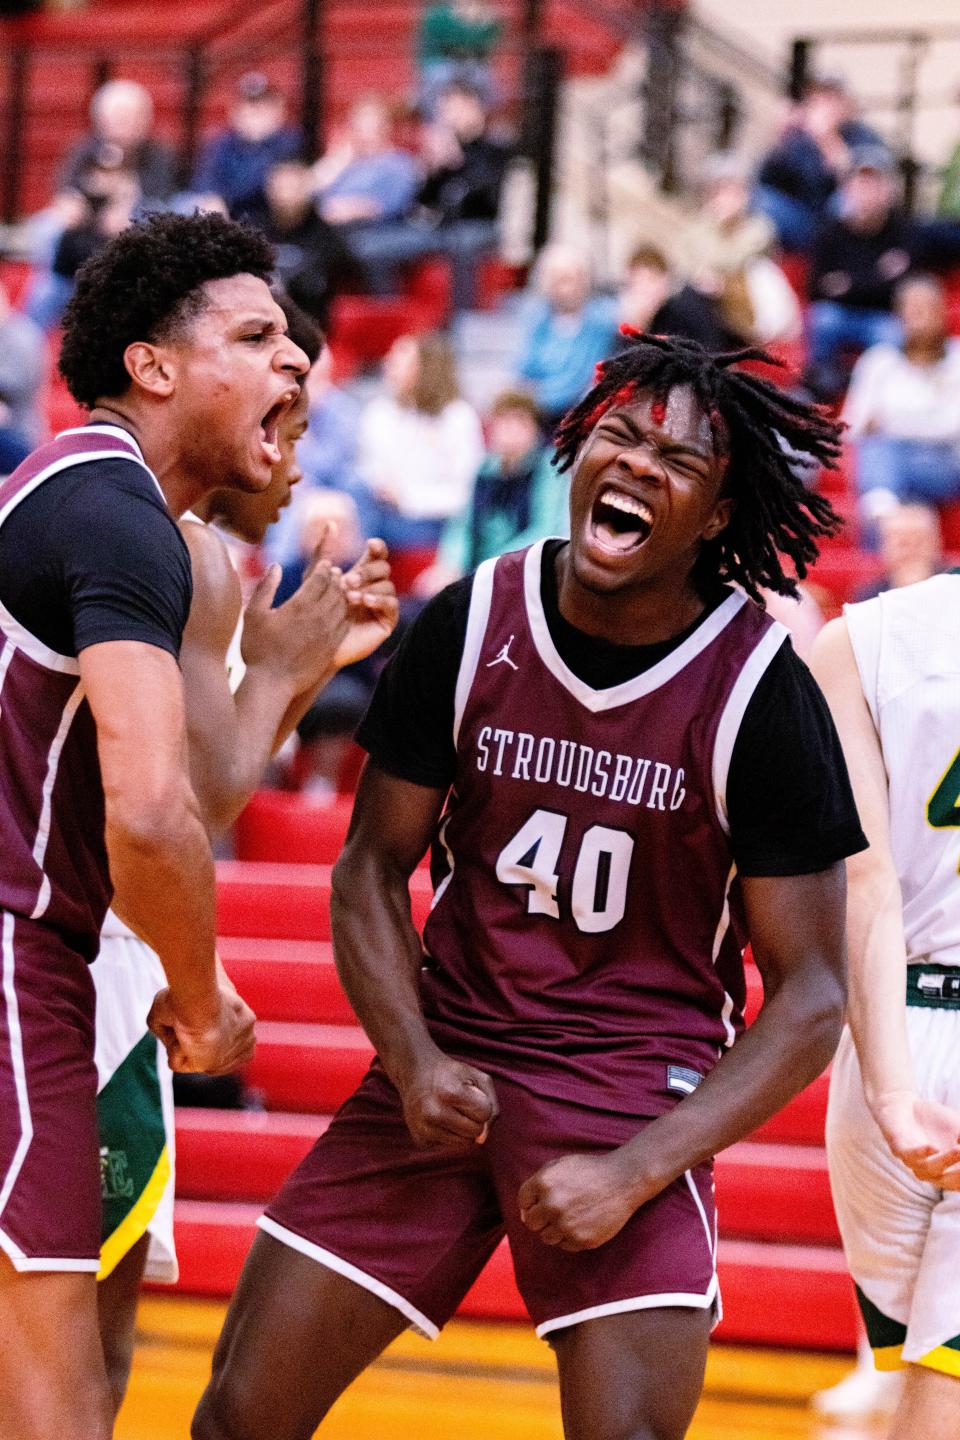 Kamoni Smith-Johnson (right) and Kevin Polonia celebrating a play on the basketball court